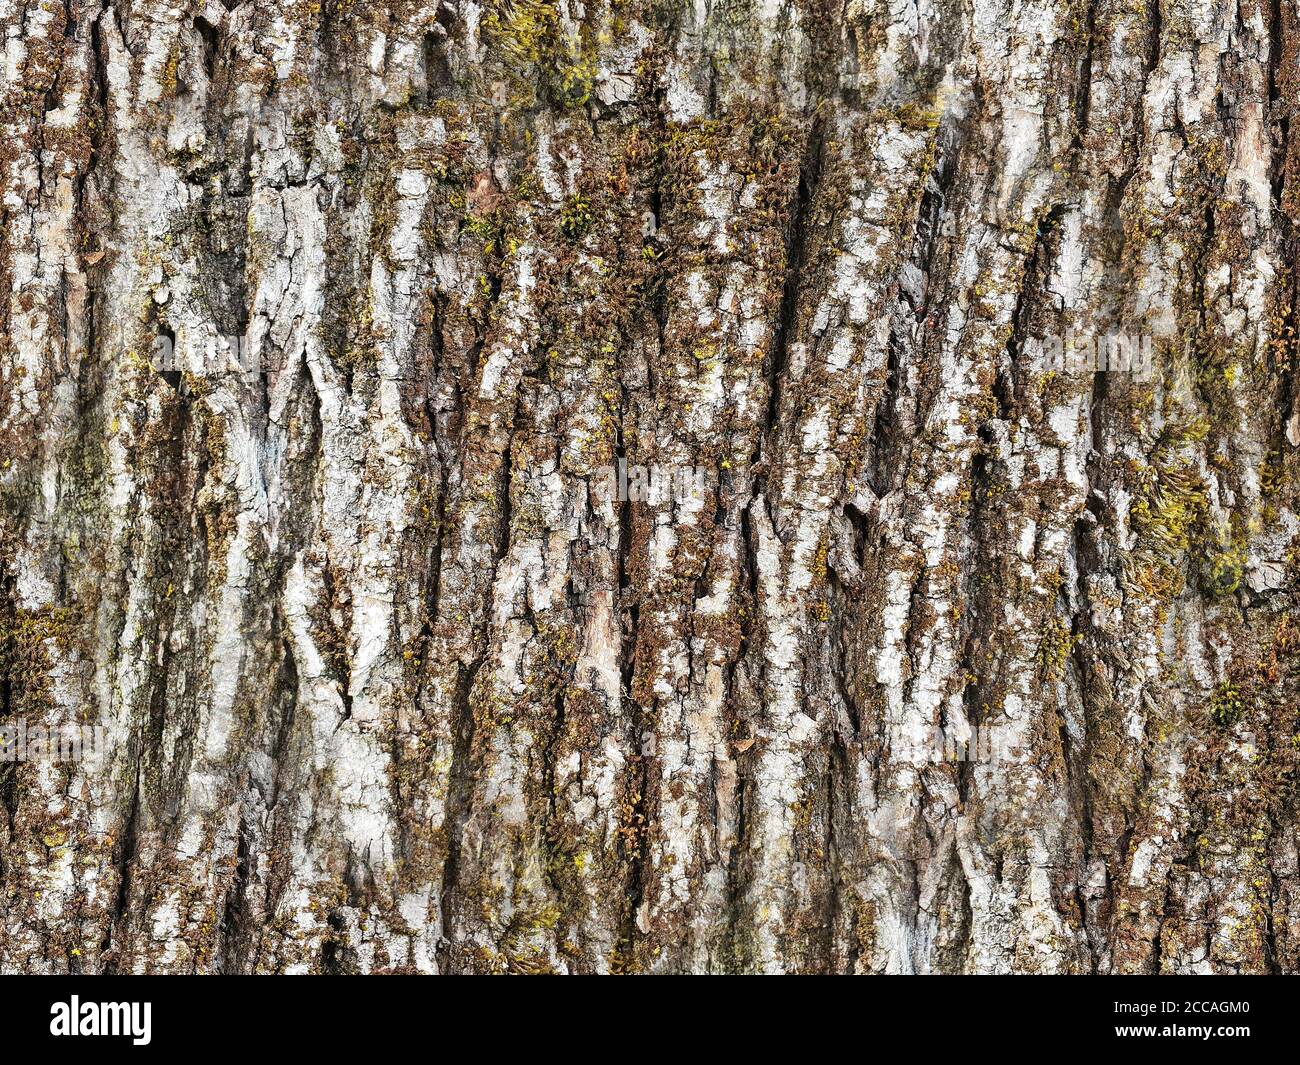 Texture of the white bark of a tree with green moss and lichen, as seamless background Stock Photo